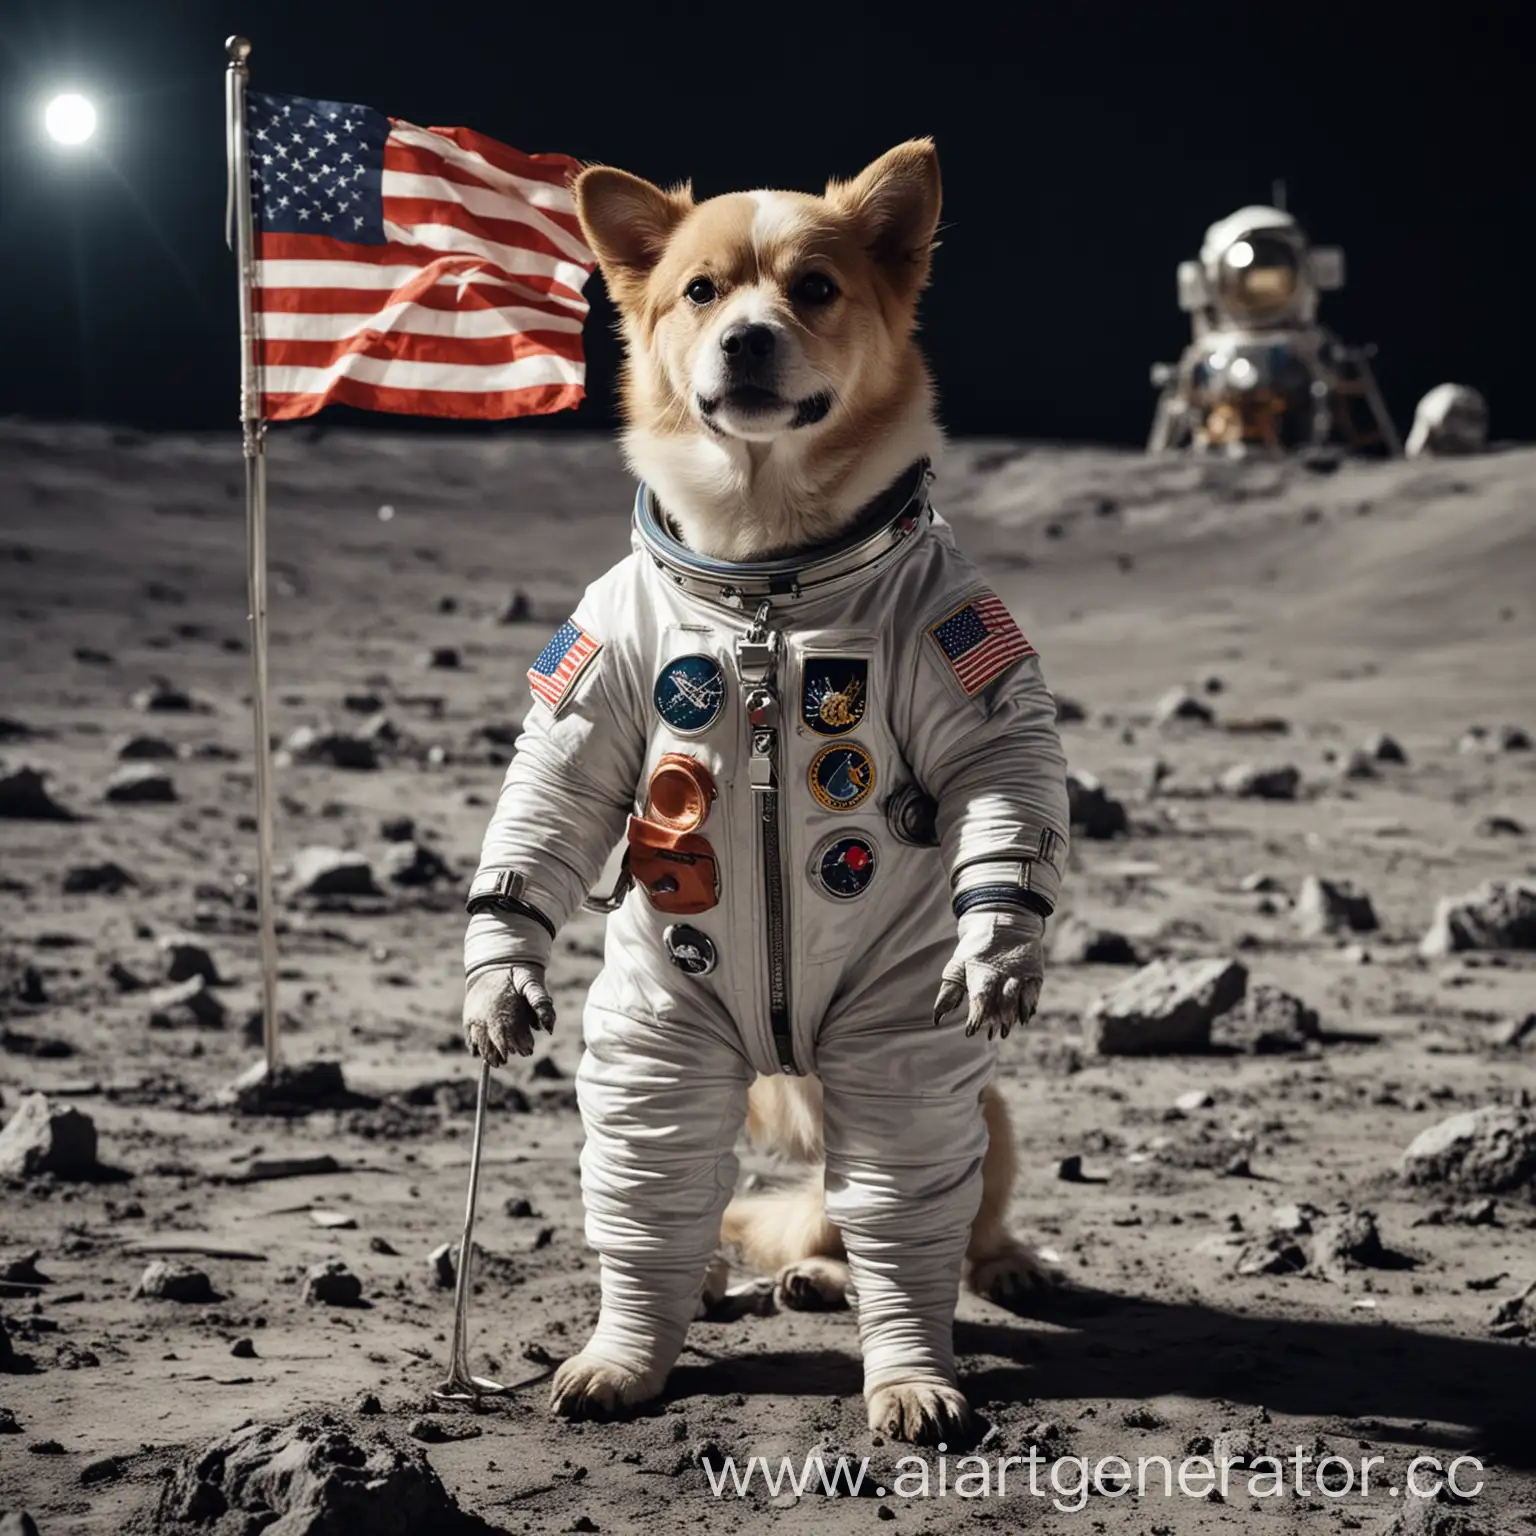 Canine-Cosmonaut-Exploration-Dog-in-Spacesuit-Plants-Flag-on-Moon